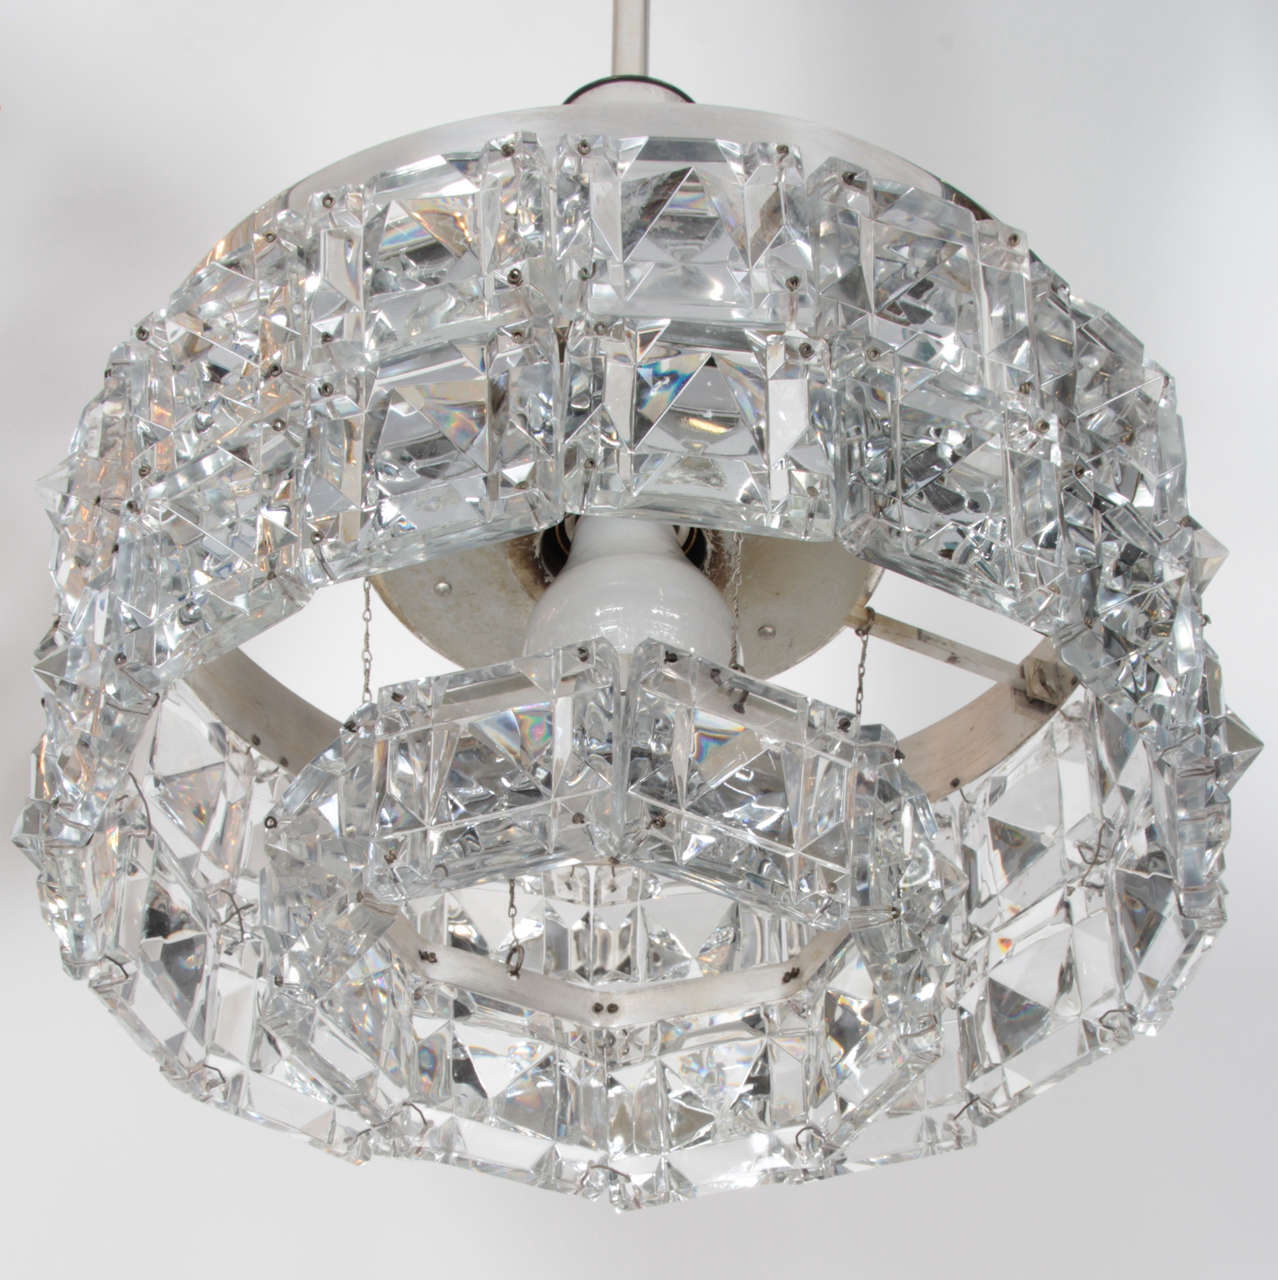  Austrian Art Deco drum chandelier composed of three rows of deep faceted square crystal prisms on a lacquered sterling frame. Crystal body measures 8.5 inches tall. Stem is adjustable to become 28